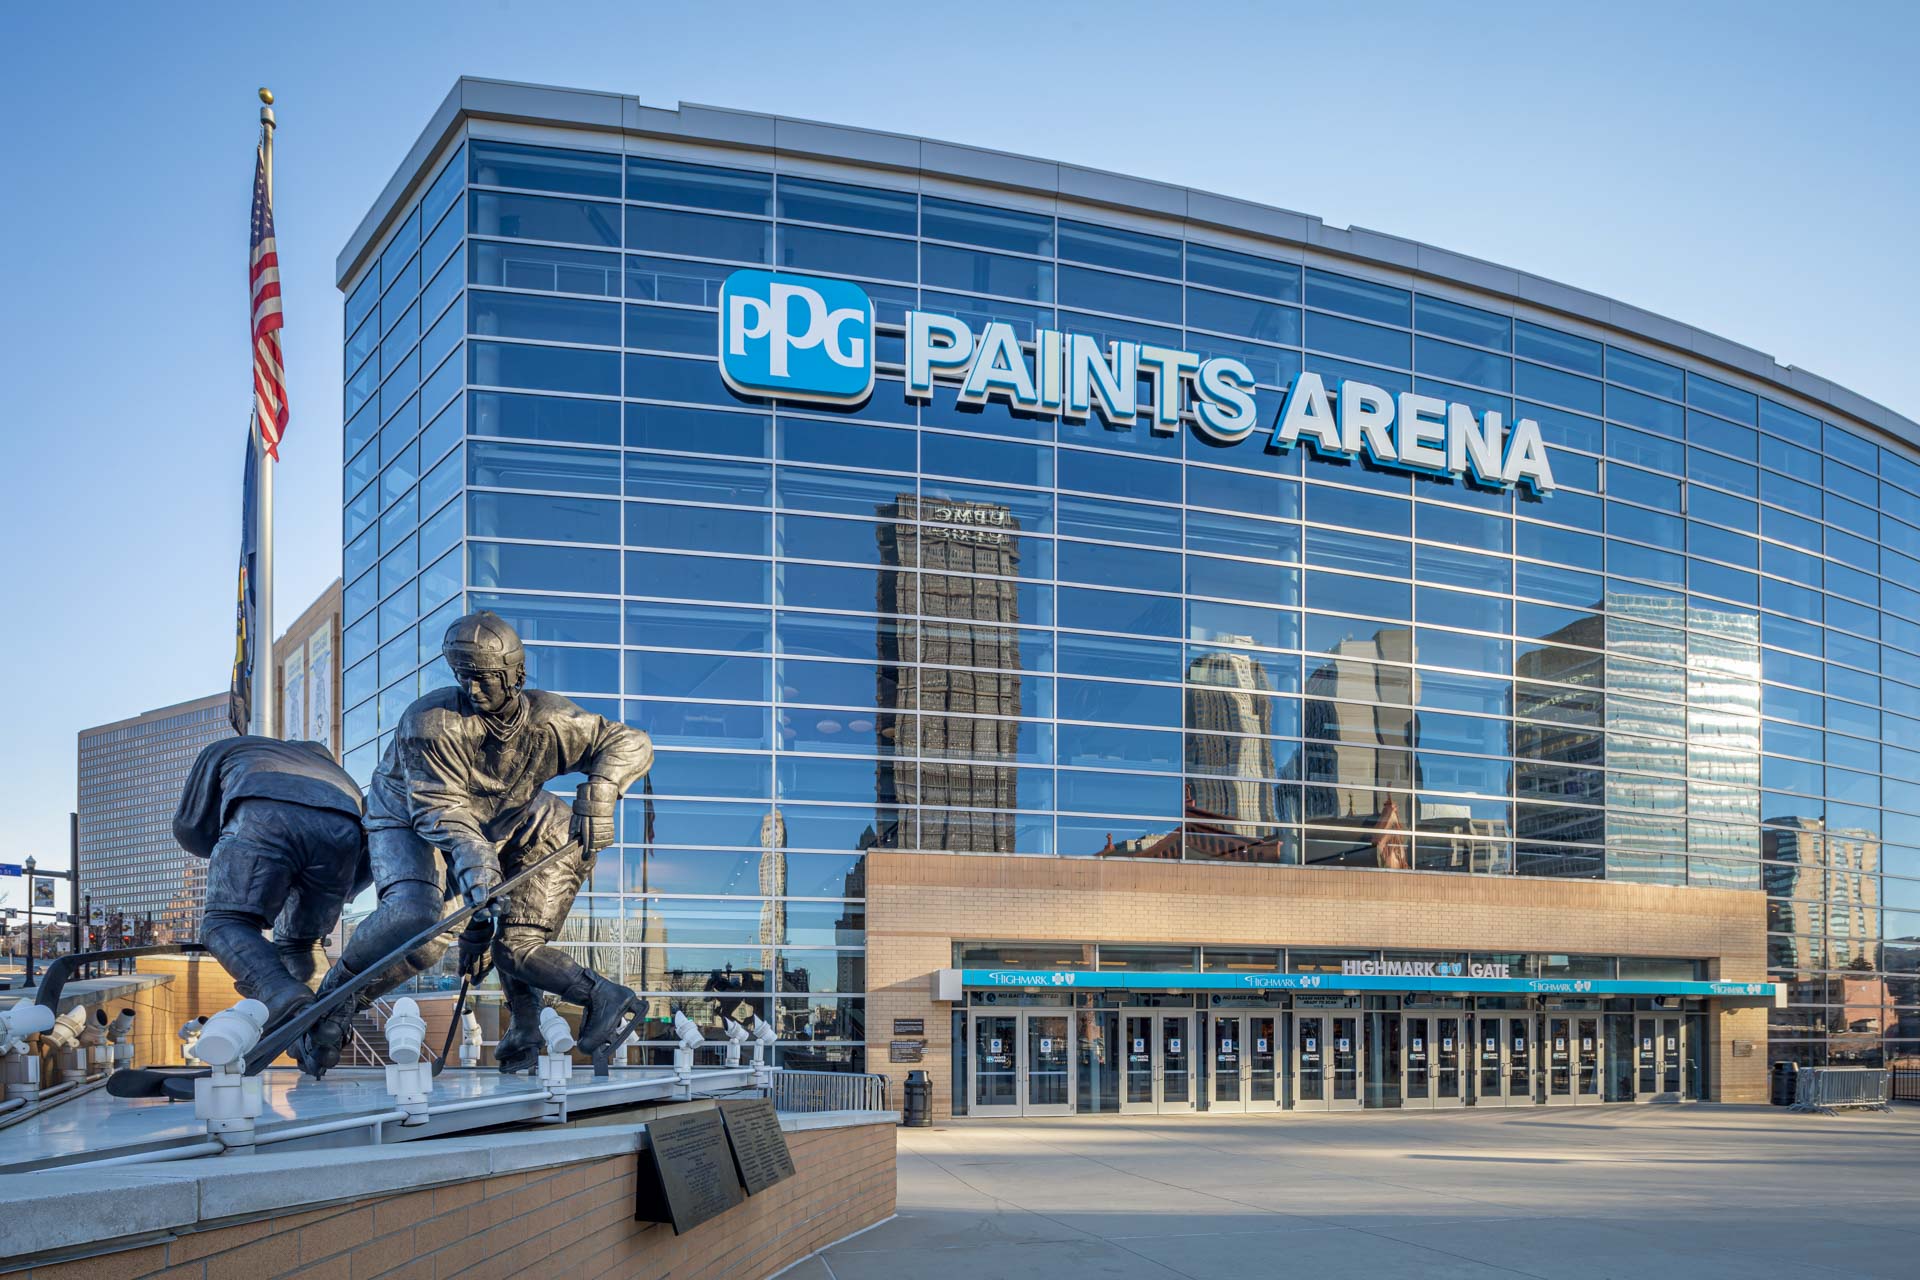 PPg Paints Arena